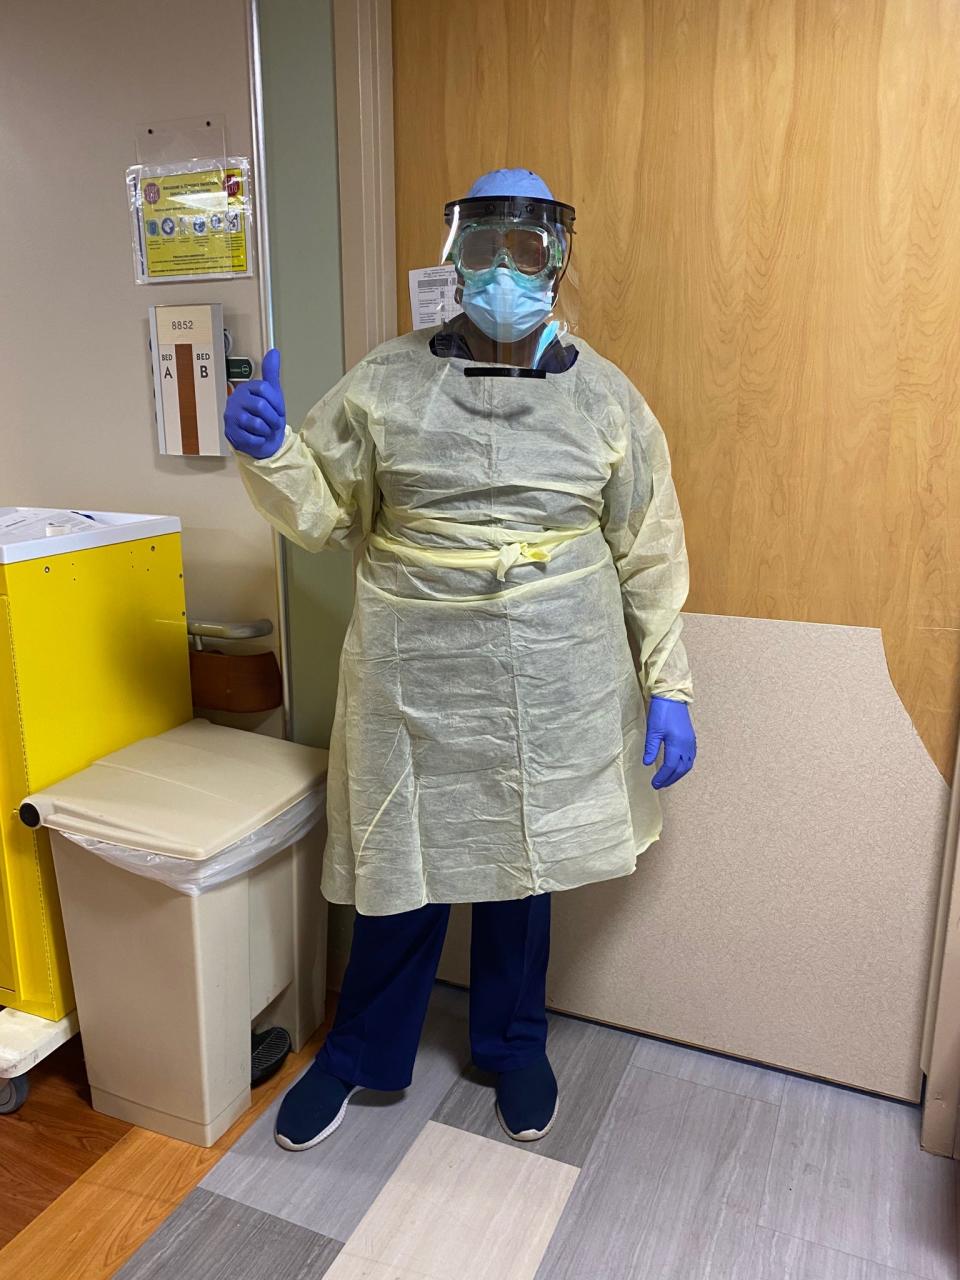 Debra Washington, a registered nurse and vice president of the District of Columbia Nurses Association, has to suit up in protective gear to treat patients afflicted with COVID-19.